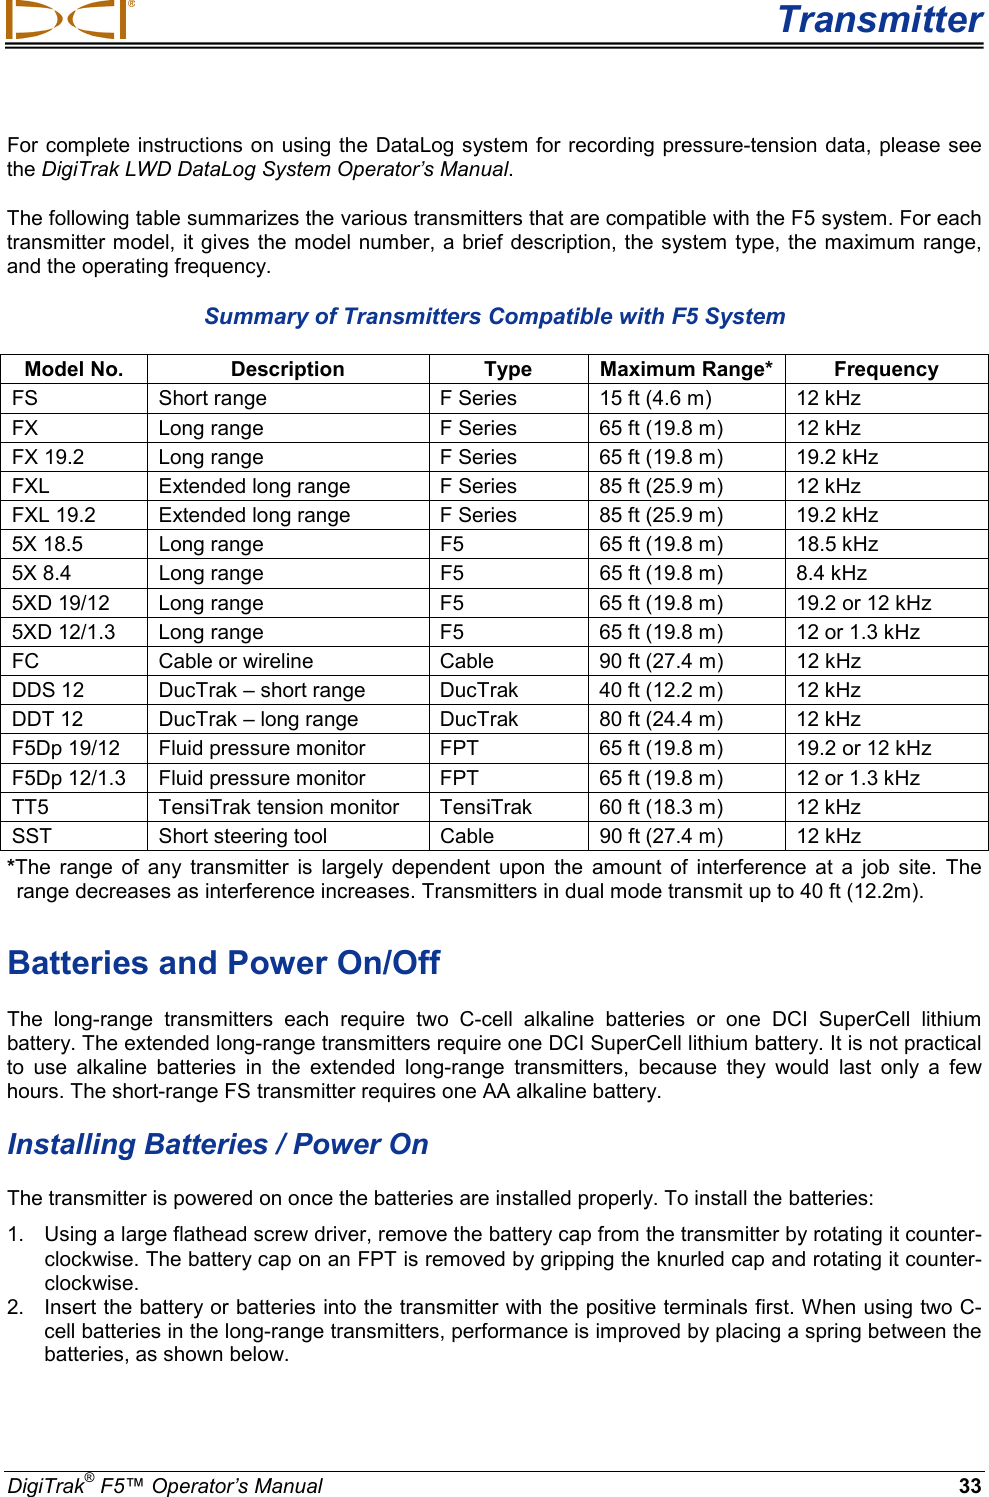  Transmitter DigiTrak® F5™ Operator’s Manual 33 For complete instructions on using the  DataLog system for recording pressure-tension data, please see the DigiTrak LWD DataLog System Operator’s Manual. The following table summarizes the various transmitters that are compatible with the F5 system. For each transmitter model, it gives the model number, a brief description, the system type, the maximum range, and the operating frequency.  Summary of Transmitters Compatible with F5 System Model No. Description Type Maximum Range* Frequency FS Short range F Series 15 ft (4.6 m) 12 kHz FX Long range F Series 65 ft (19.8 m) 12 kHz FX 19.2 Long range F Series 65 ft (19.8 m) 19.2 kHz FXL Extended long range F Series 85 ft (25.9 m) 12 kHz FXL 19.2 Extended long range F Series 85 ft (25.9 m) 19.2 kHz 5X 18.5 Long range F5 65 ft (19.8 m) 18.5 kHz 5X 8.4 Long range F5 65 ft (19.8 m) 8.4 kHz 5XD 19/12 Long range F5 65 ft (19.8 m) 19.2 or 12 kHz 5XD 12/1.3 Long range F5 65 ft (19.8 m)   12 or 1.3 kHz FC  Cable or wireline Cable 90 ft (27.4 m) 12 kHz DDS 12 DucTrak – short range DucTrak 40 ft (12.2 m) 12 kHz DDT 12   DucTrak – long range DucTrak 80 ft (24.4 m) 12 kHz F5Dp 19/12 Fluid pressure monitor FPT 65 ft (19.8 m) 19.2 or 12 kHz F5Dp 12/1.3 Fluid pressure monitor FPT 65 ft (19.8 m) 12 or 1.3 kHz TT5 TensiTrak tension monitor  TensiTrak 60 ft (18.3 m) 12 kHz SST  Short steering tool Cable 90 ft (27.4 m) 12 kHz *The range of any transmitter is largely dependent upon the amount of interference at a job site. The range decreases as interference increases. Transmitters in dual mode transmit up to 40 ft (12.2m).  Batteries and Power On/Off The long-range transmitters each require two C-cell alkaline batteries or one DCI SuperCell lithium battery. The extended long-range transmitters require one DCI SuperCell lithium battery. It is not practical to use alkaline batteries in the extended long-range transmitters, because they would last only a few hours. The short-range FS transmitter requires one AA alkaline battery. Installing Batteries / Power On The transmitter is powered on once the batteries are installed properly. To install the batteries: 1. Using a large flathead screw driver, remove the battery cap from the transmitter by rotating it counter-clockwise. The battery cap on an FPT is removed by gripping the knurled cap and rotating it counter-clockwise.  2. Insert the battery or batteries into the transmitter with the positive terminals first. When using two C-cell batteries in the long-range transmitters, performance is improved by placing a spring between the batteries, as shown below. 